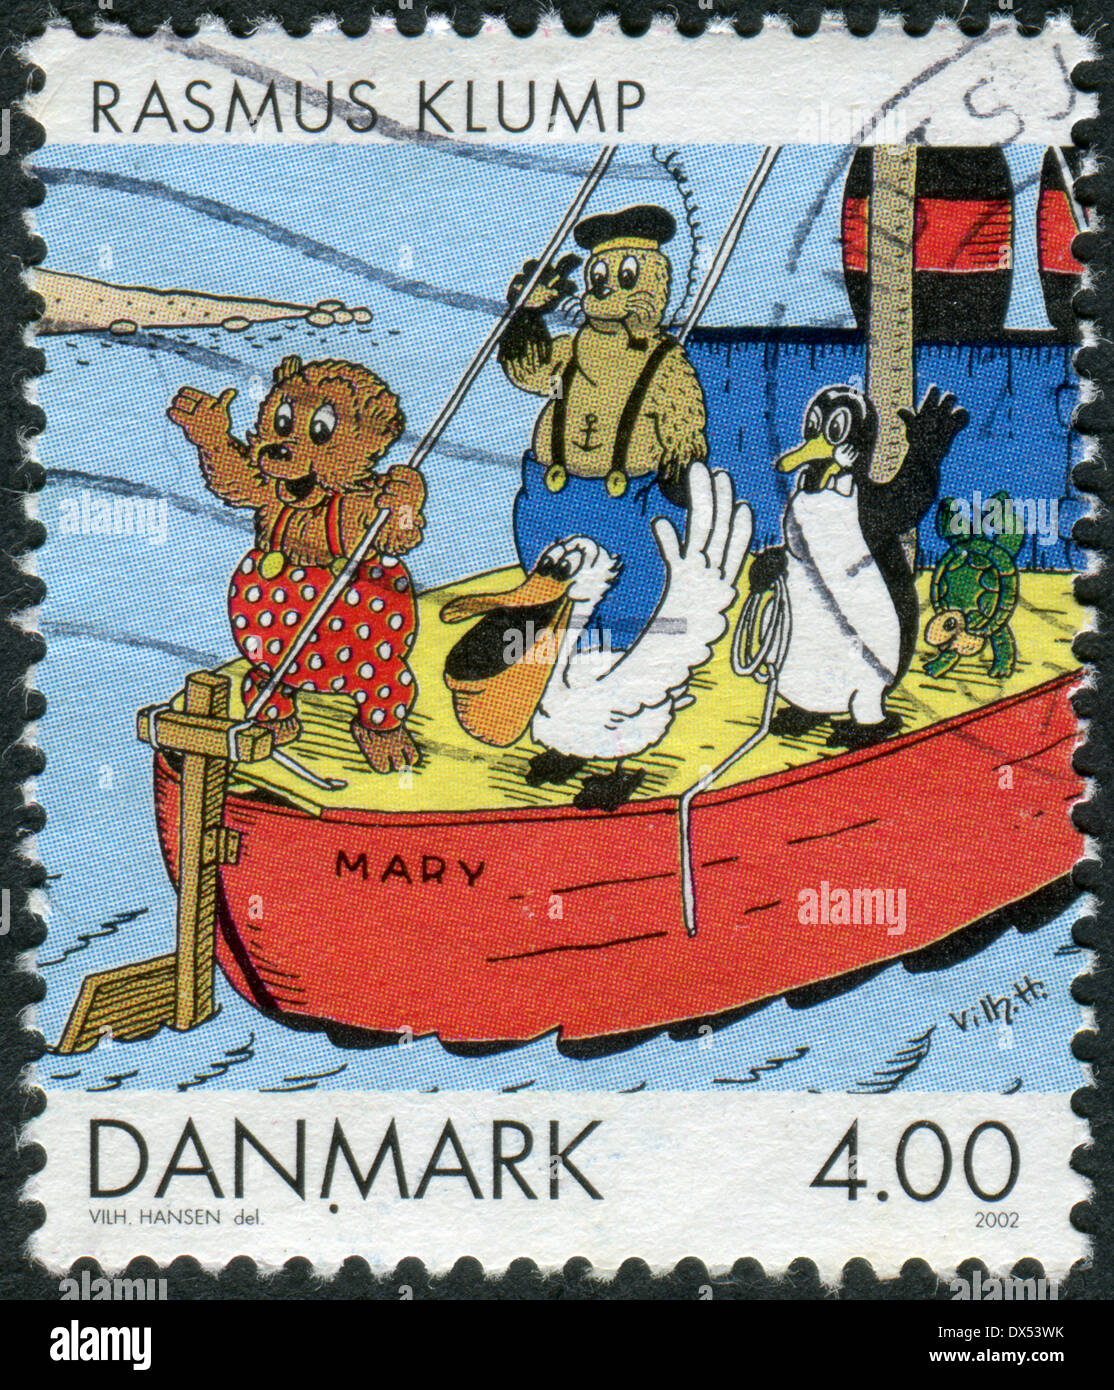 Postage stamp printed in Denmark, Comics and Cartoons Issue, shows Rasmus Klump, by Vilhelm Hansen Stock Photo